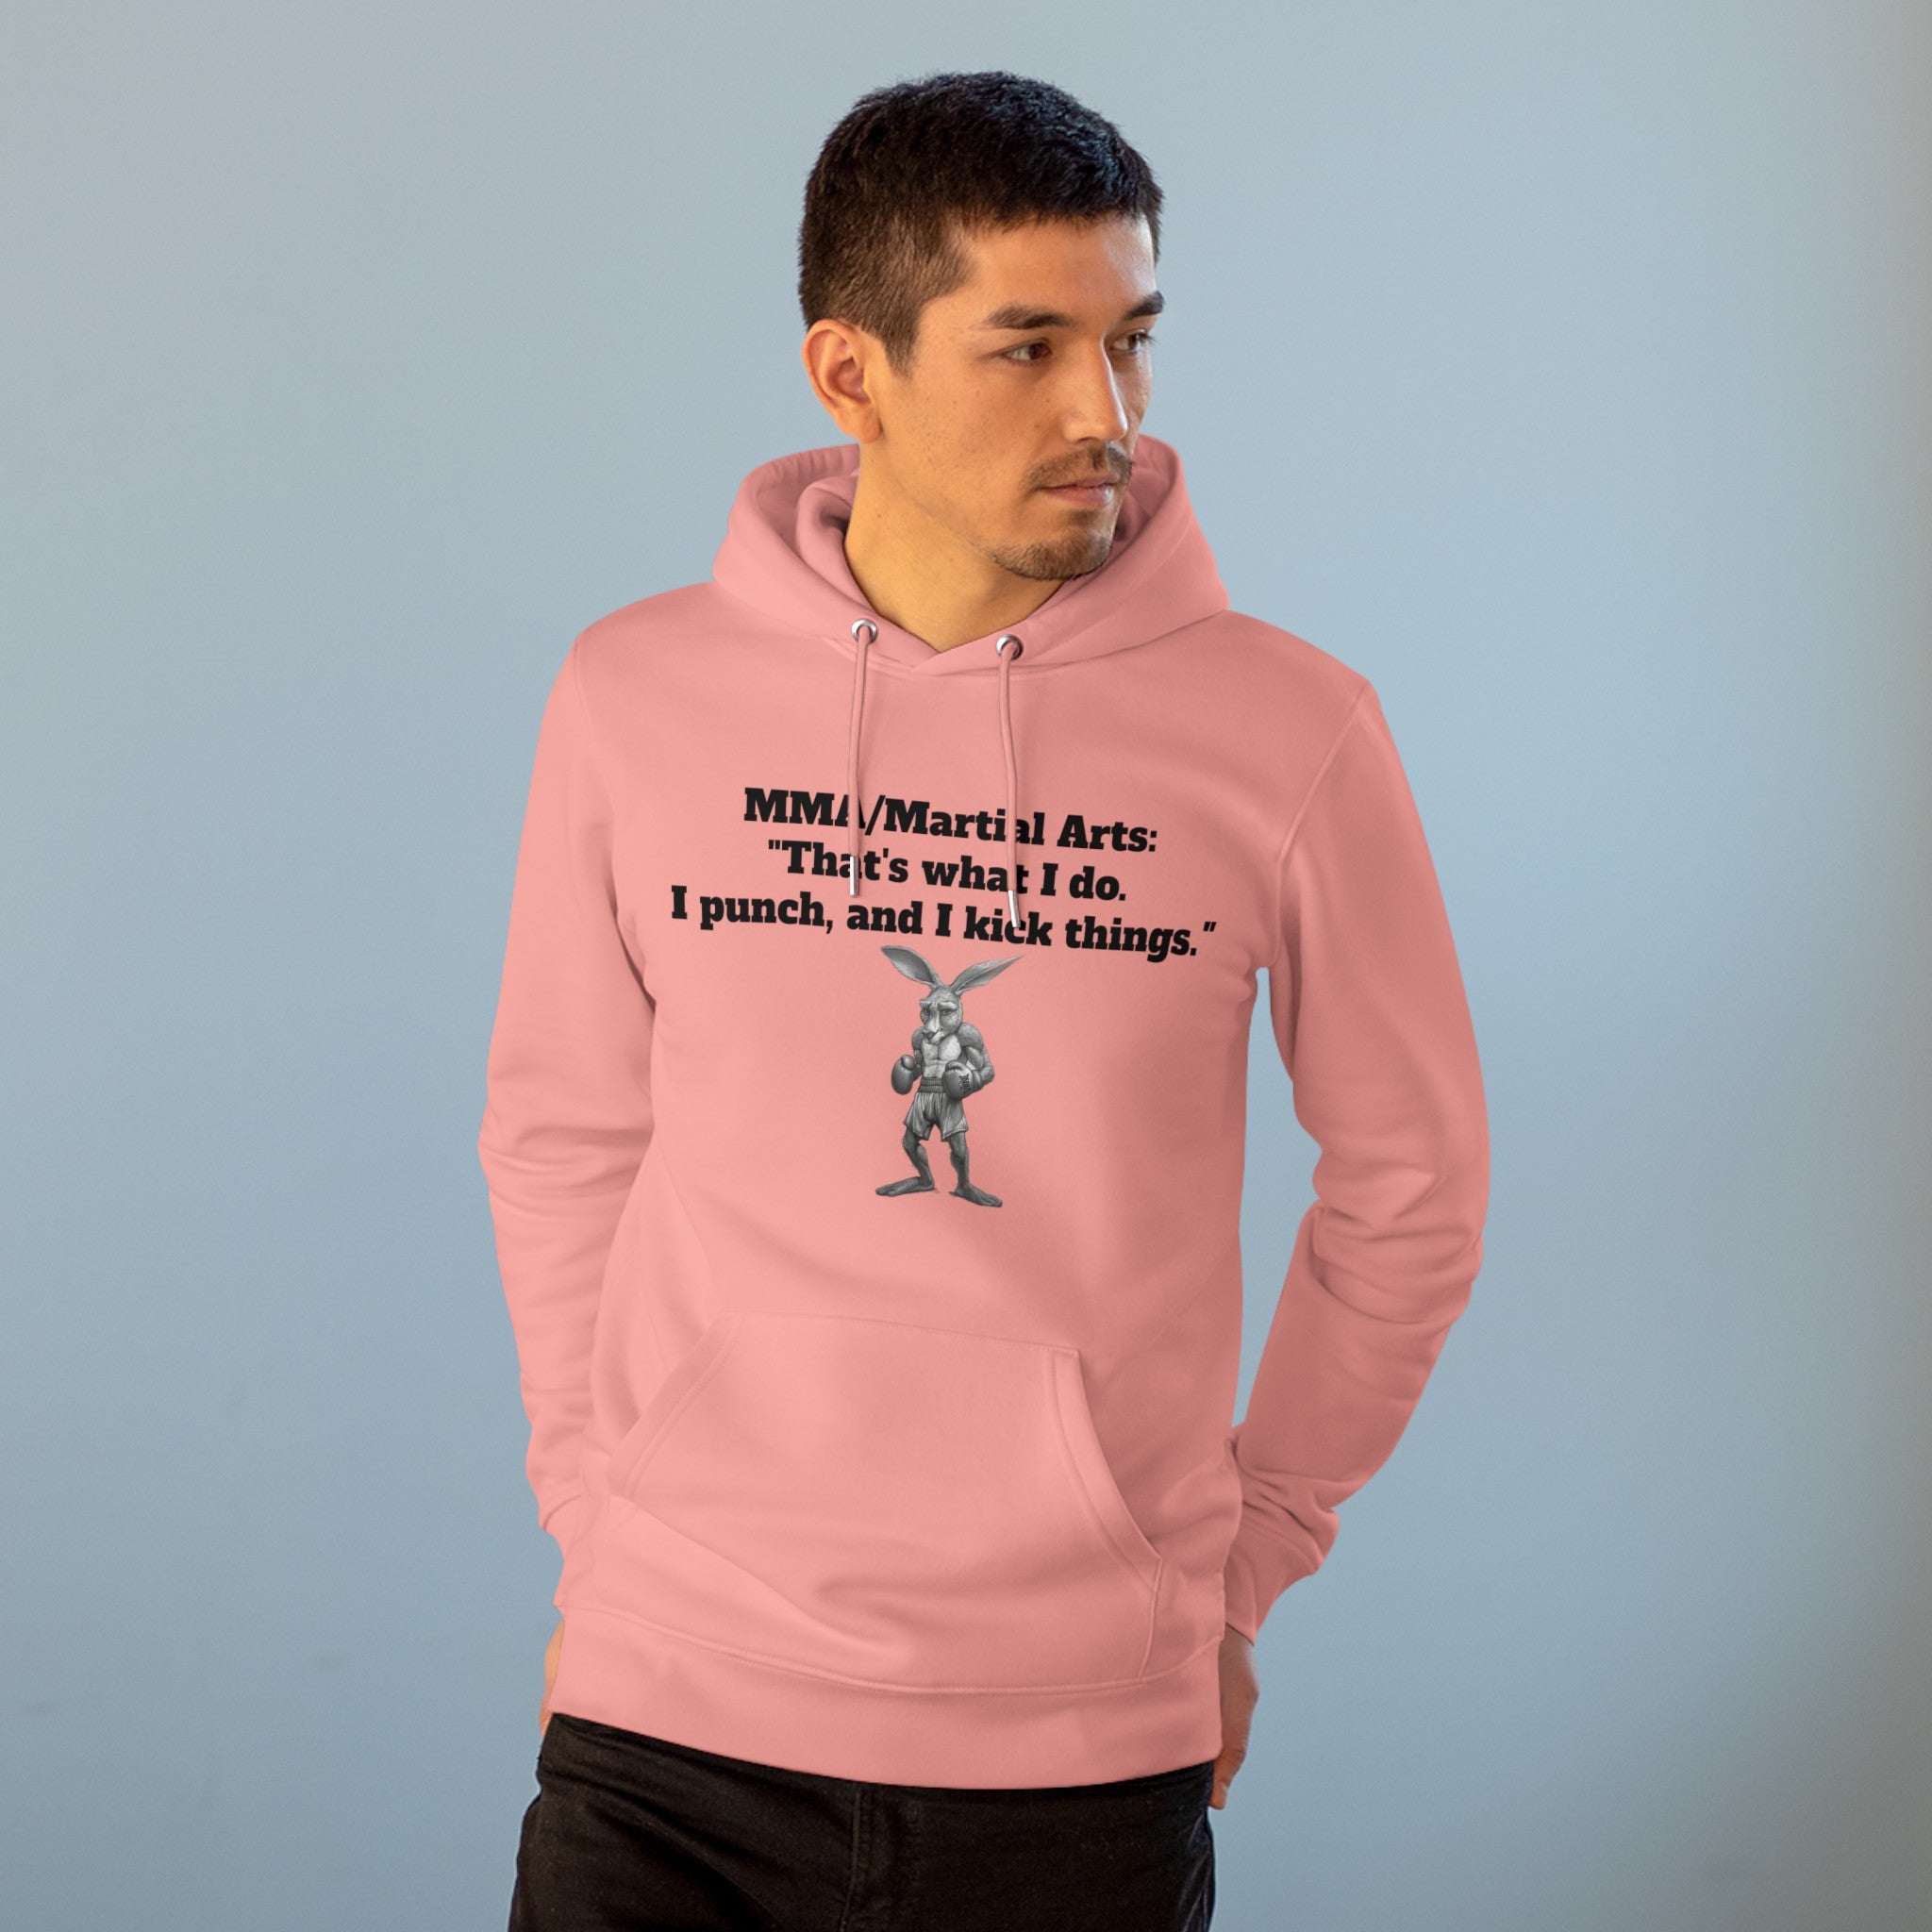 The image showcases a stylish unisex cruiser hoodie, featuring a dynamic illustration of a kangaroo in a boxing pose. The bold statement "That's What I Do. I Punch, and I Kick Things." is prominently displayed, highlighting the hoodie’s unique blend of humor and martial arts culture. The hoodie’s soft, comfortable fabric and relaxed fit are also evident.